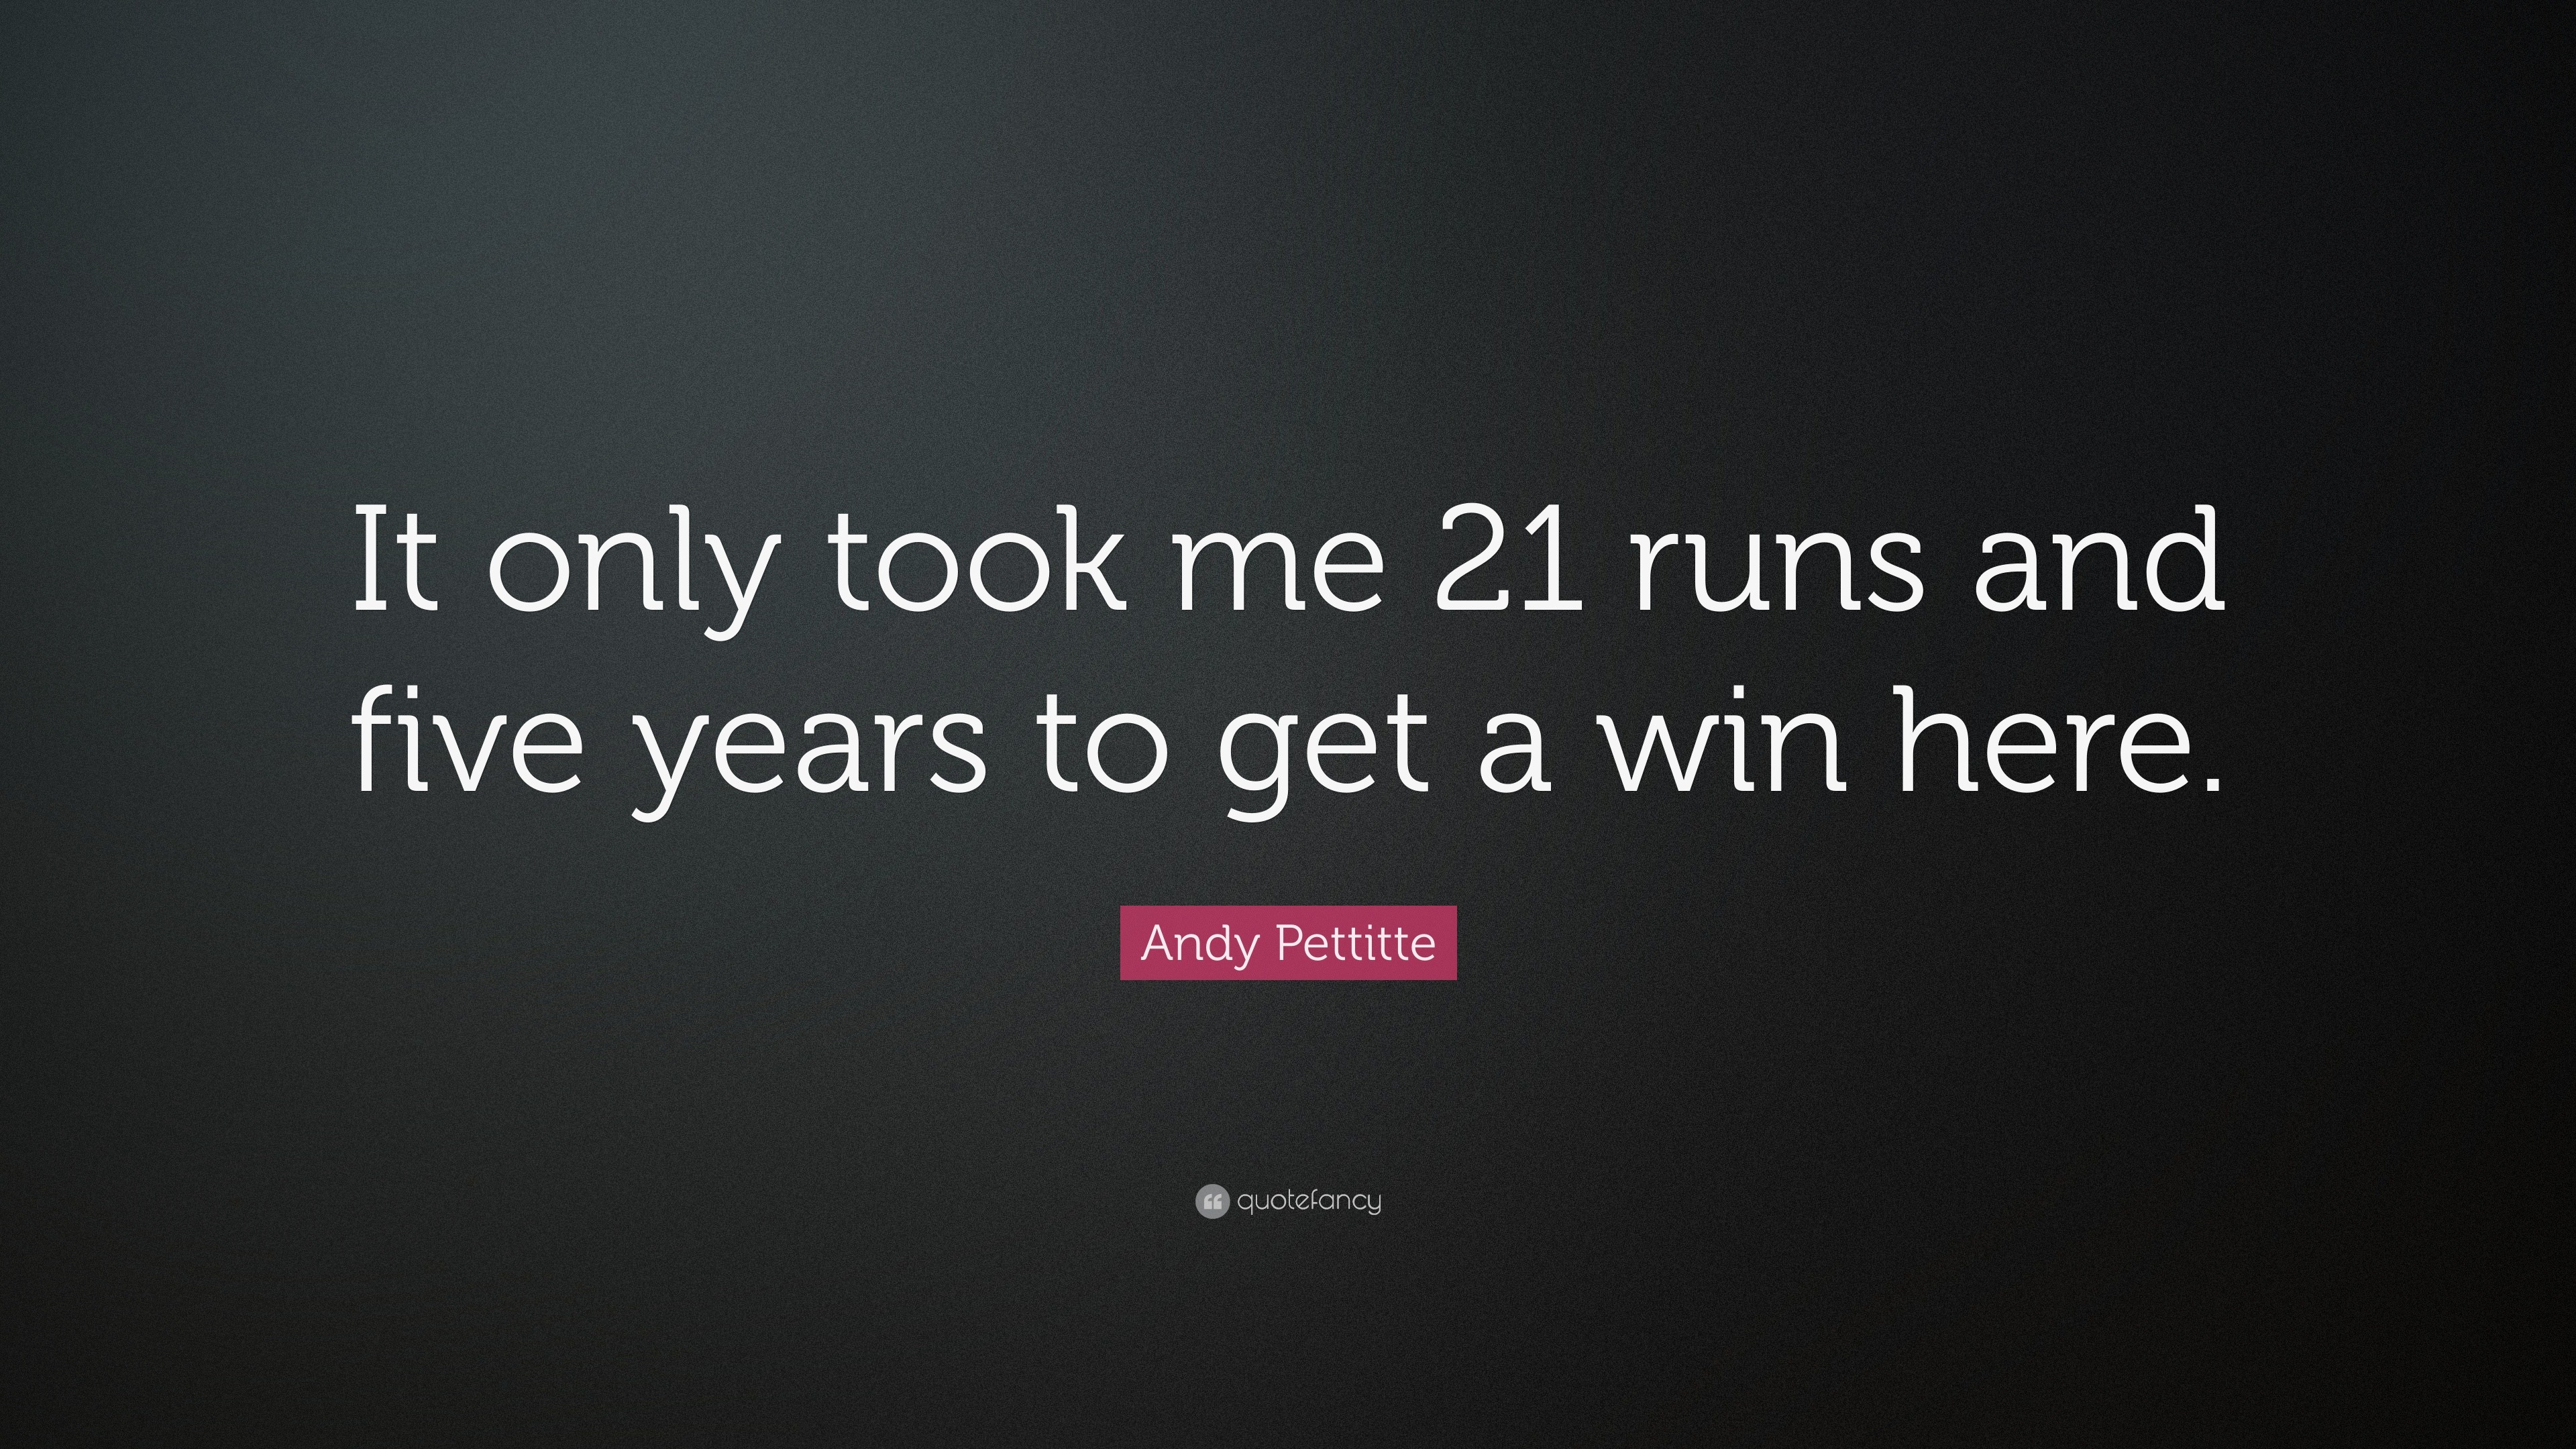 Top 15 Andy Pettitte Quotes (2023 Update) - Quotefancy